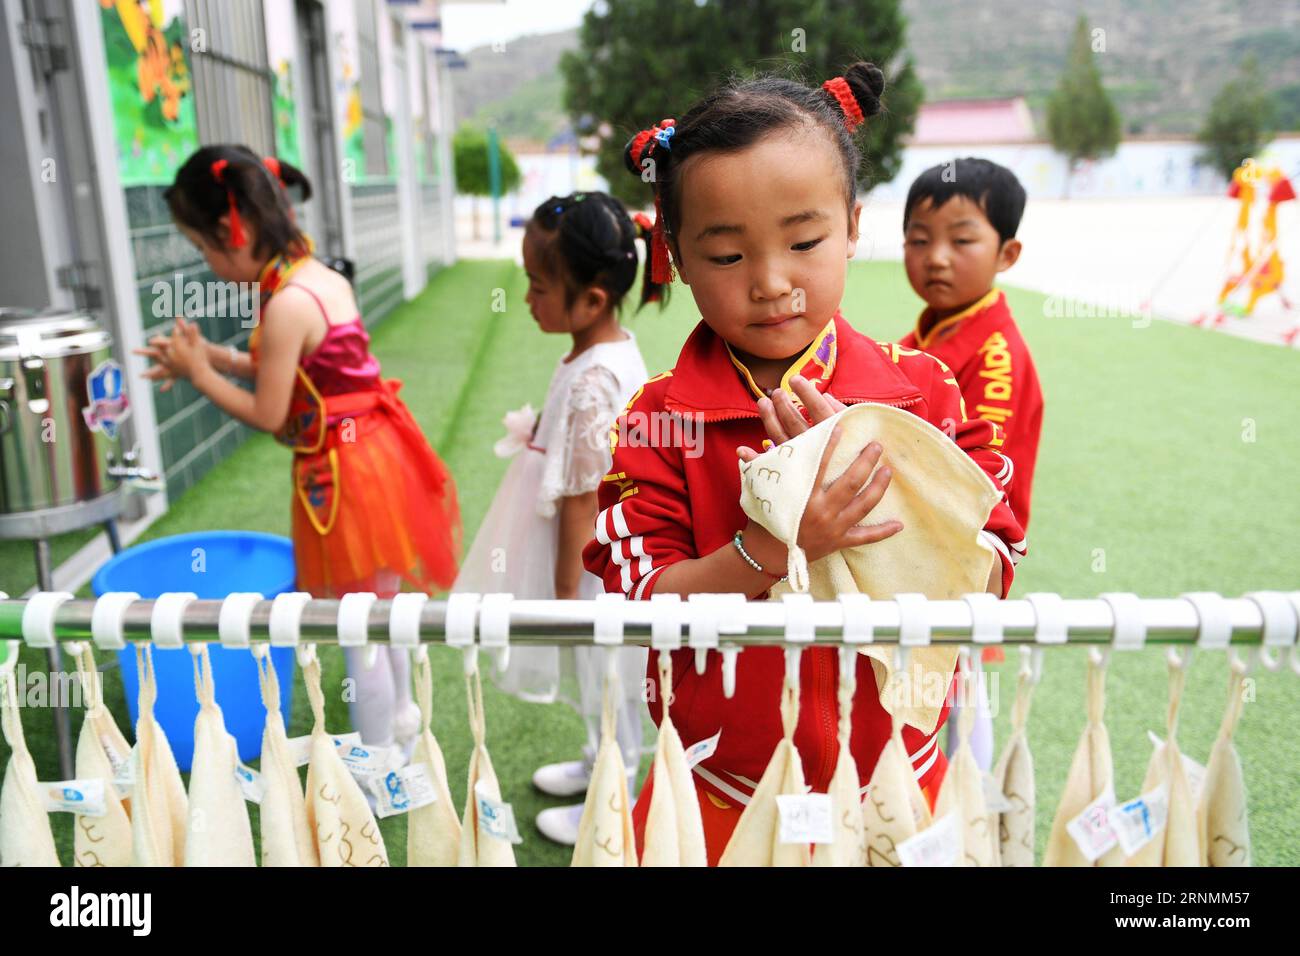 (170603) -- HUACHI, June 3, 2017 -- A little girl wipes with a towel after washing her hands at a kindergarten in Xinbao Village of Huachi County, northwest China s Gansu Province, June 3, 2017. To improve the hygiene education in remote areas, China Develpment Research Foundation and Unilever carried out a project to promote hand wash among children in classes. The project so far has covered more than 10,000 rural children in serveral provinces of China. ) (ry) CHINA-GANSU-HUACHI-RURAL KINDERGARTEN-EDUCATION (CN) ChenxBin PUBLICATIONxNOTxINxCHN   Huachi June 3 2017 a Little Girl wipes With a Stock Photo